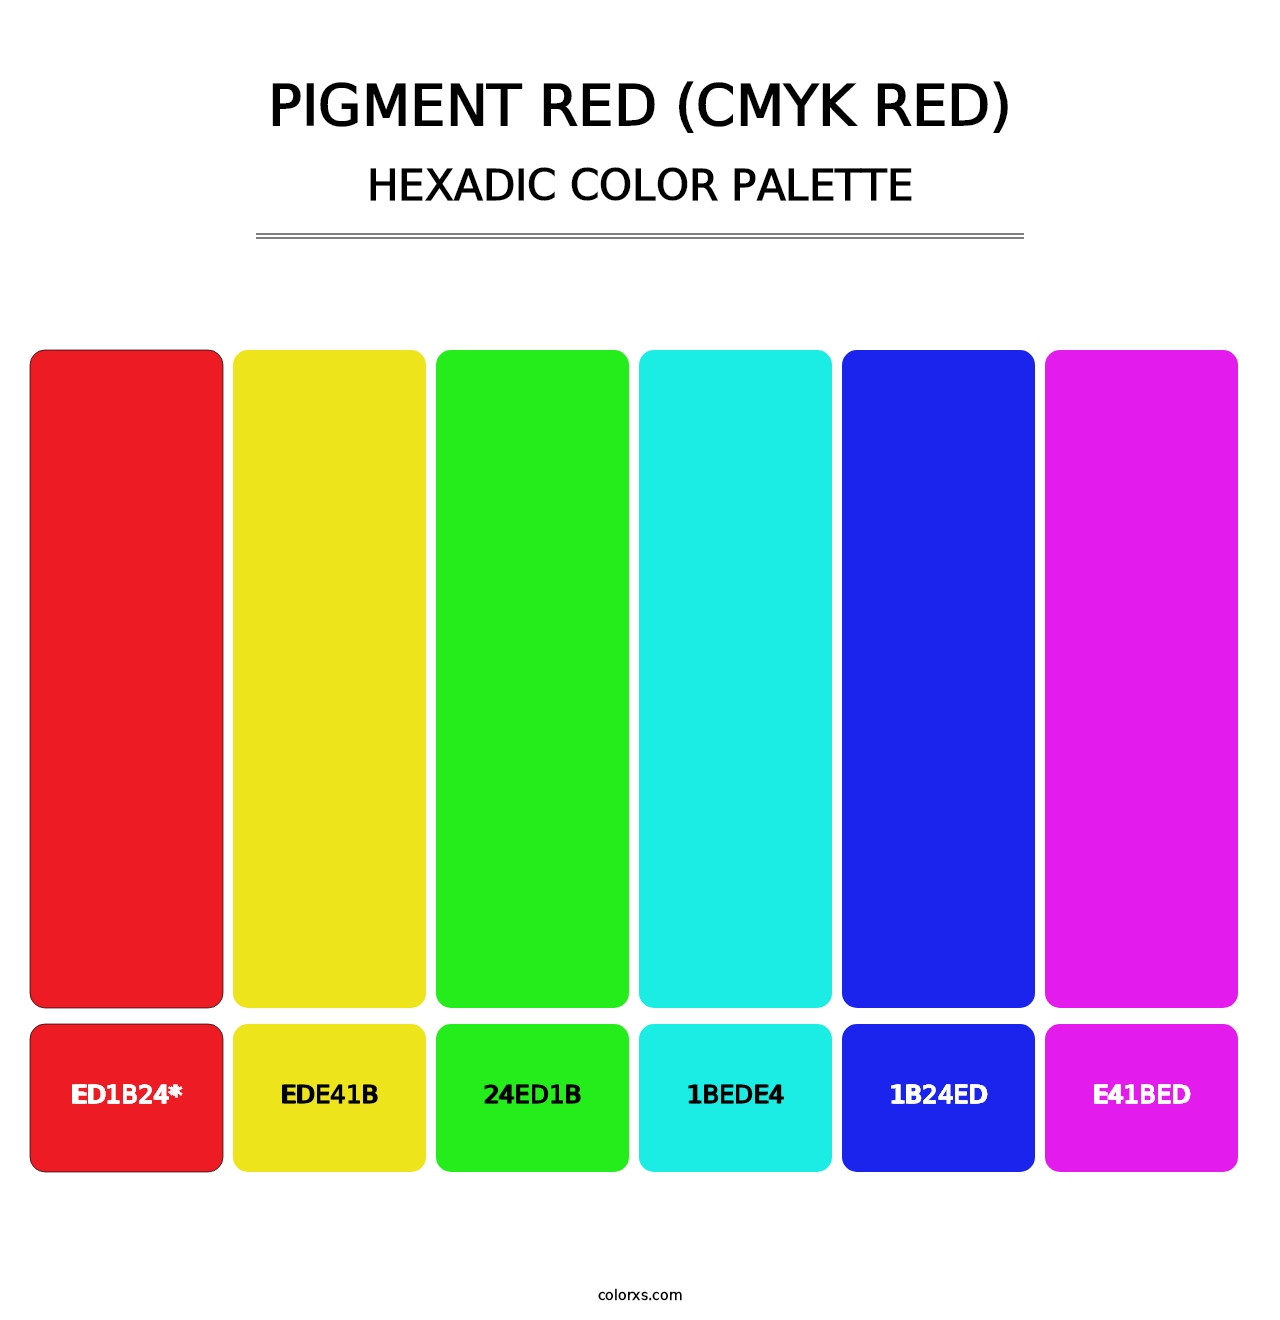 Pigment Red (CMYK Red) - Hexadic Color Palette